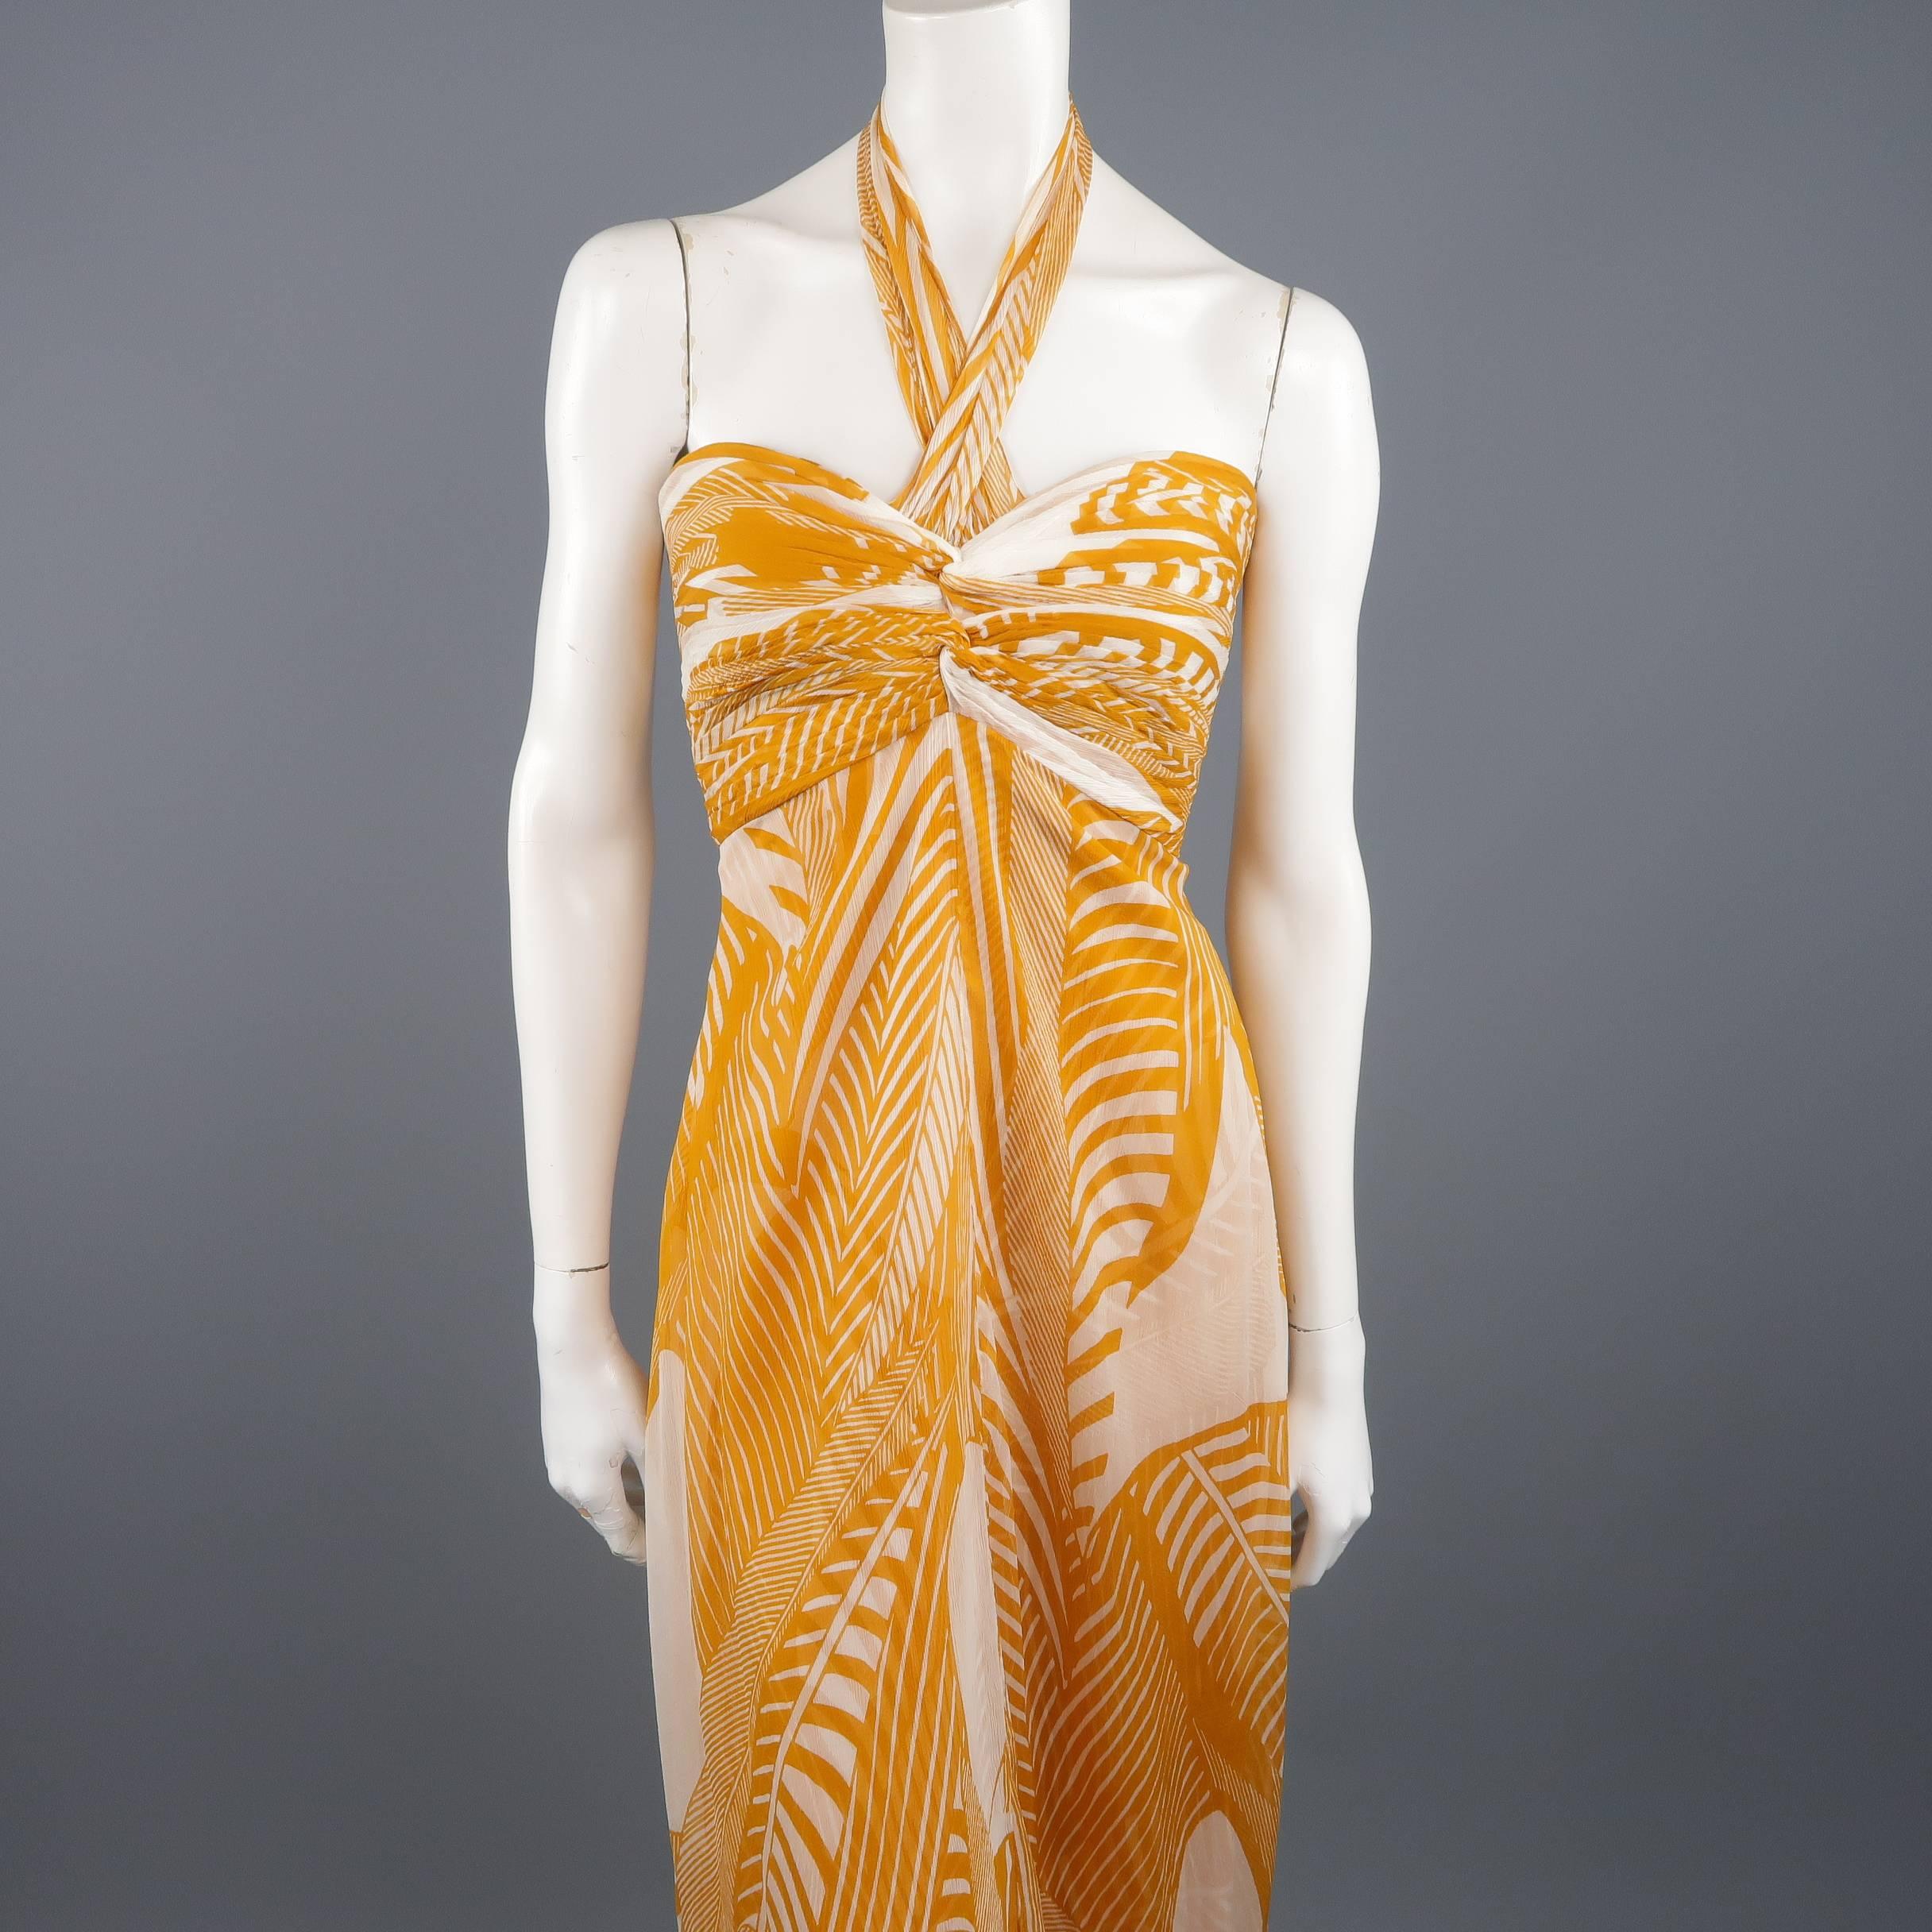 MONIQUE LHUILLIER cocktail dress comes in gold and cream printed silk chiffon with a pleated bralette, tied halter top, and long, empire waist, A line skirt. Made in USA.  Retailed $3,000.00
Excellent Pre-Owned Condition.
Marked: 8
